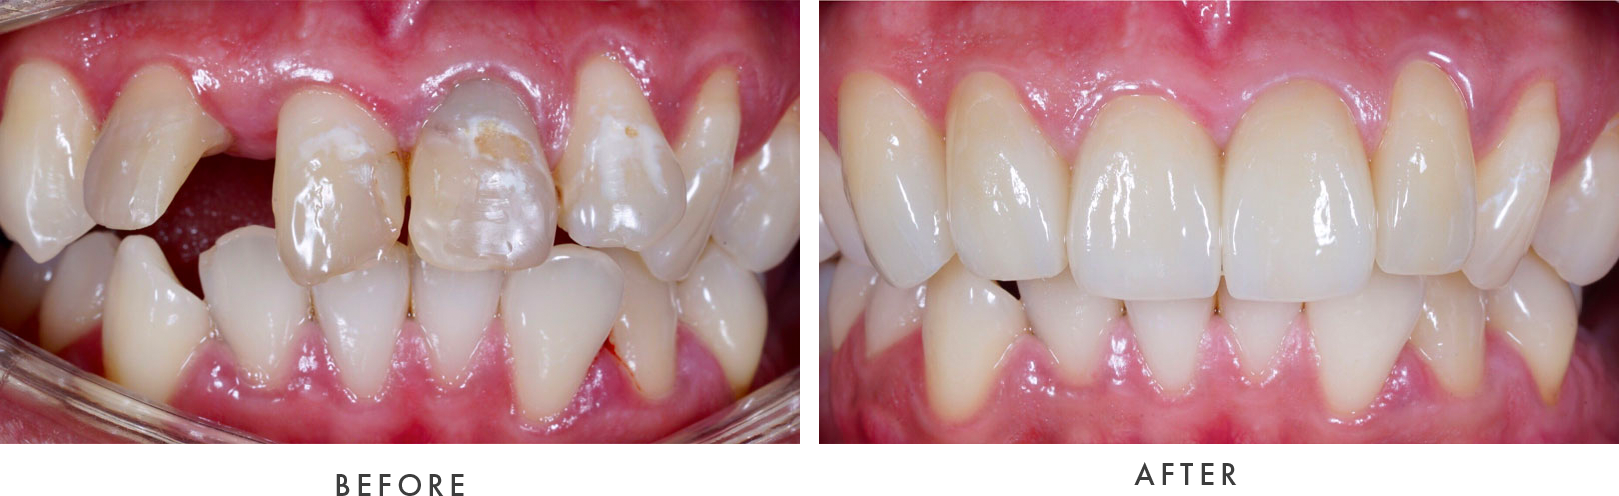 Dental Implants Before and after